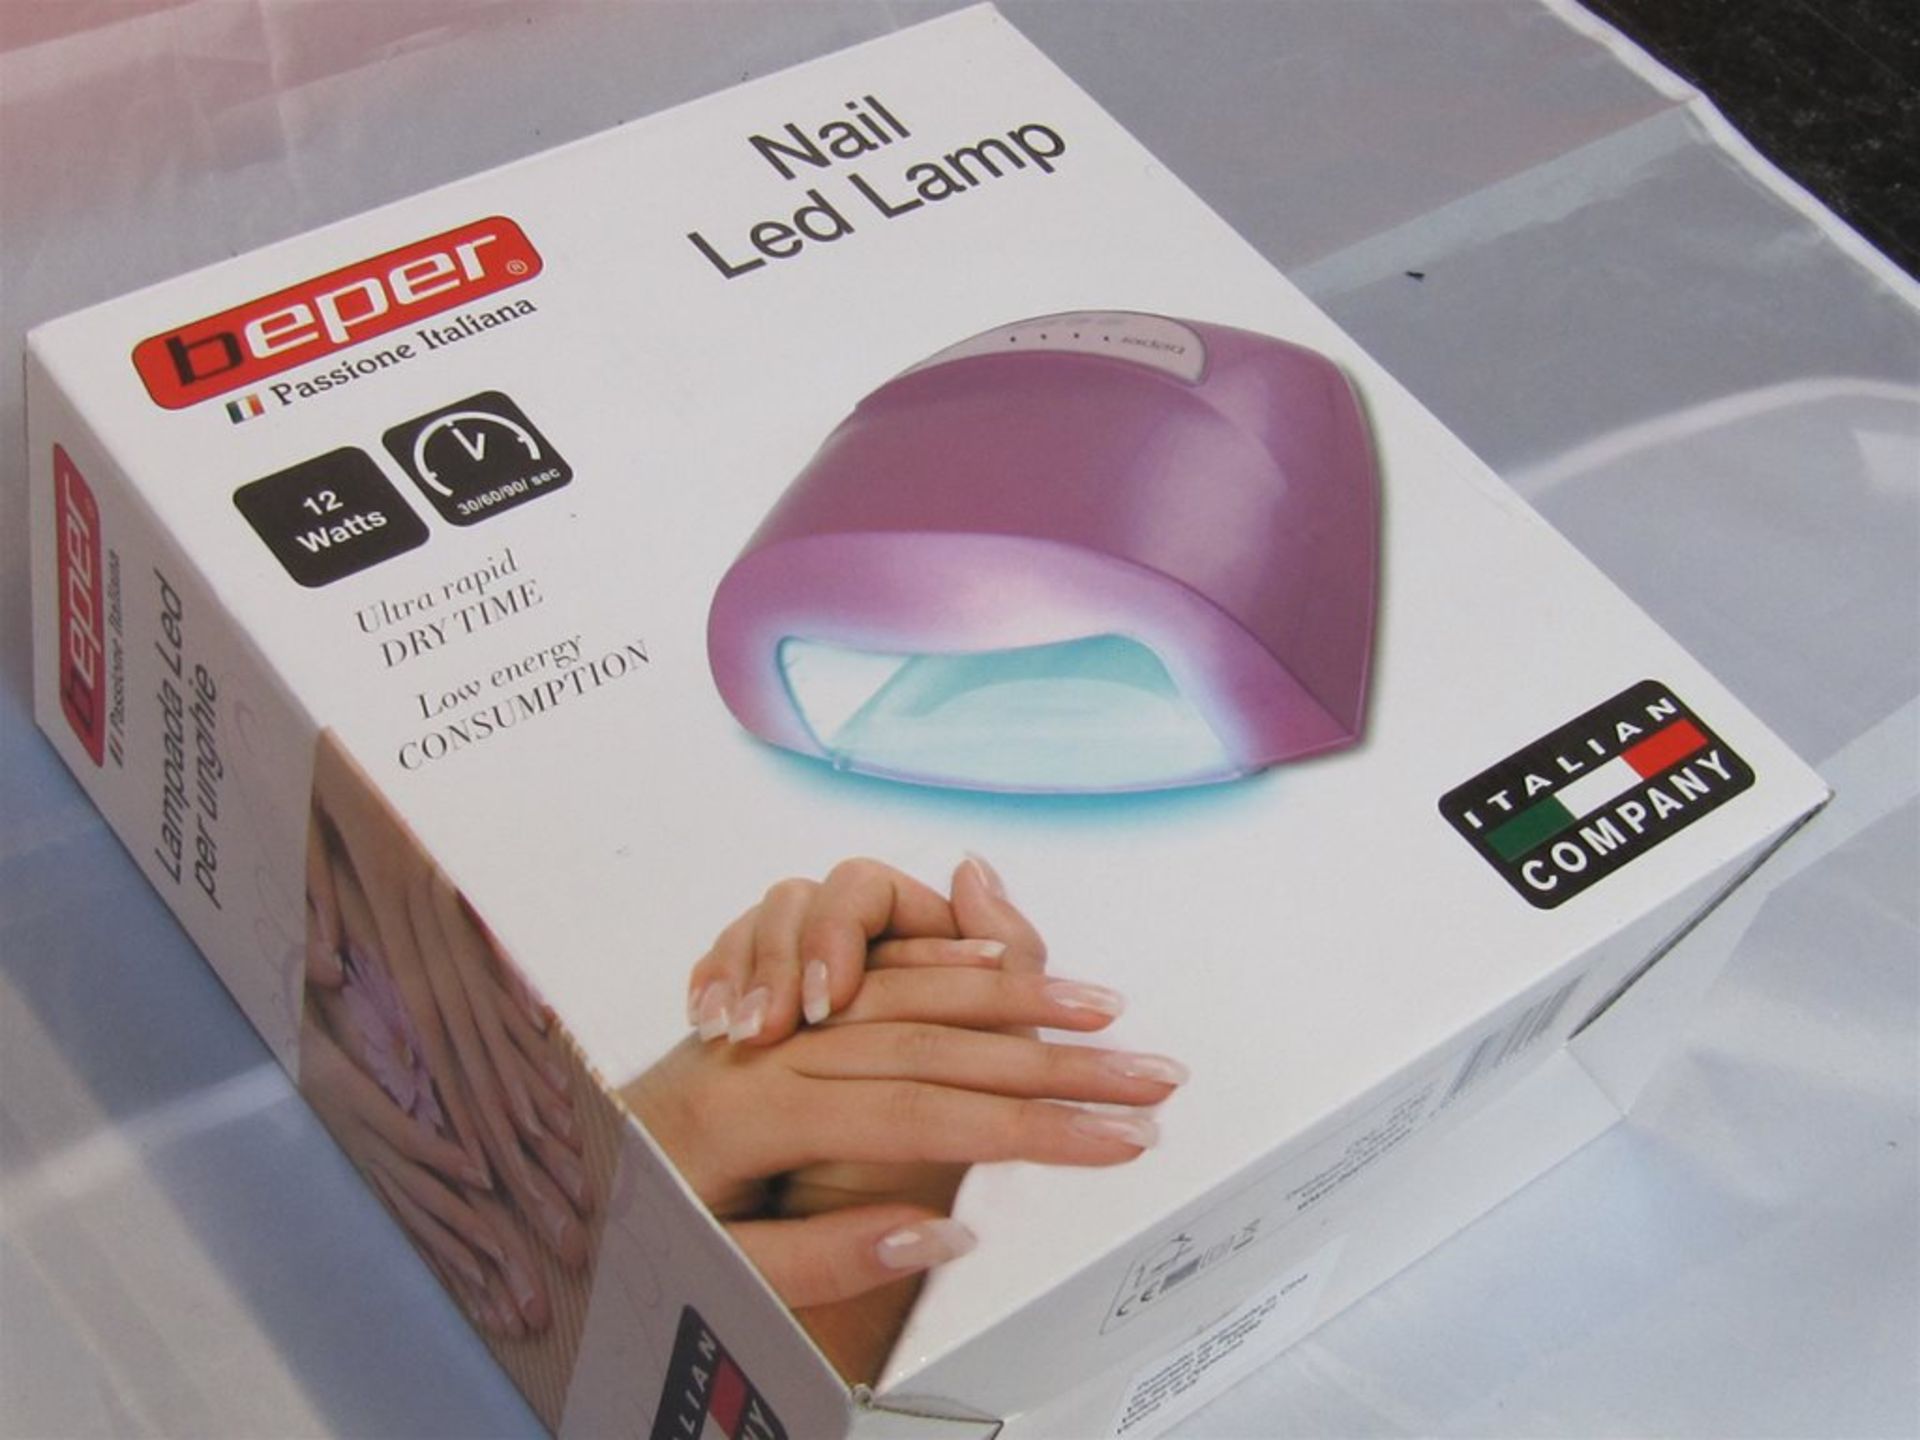 156) Beper LED Nail Lamp. 12w Rapid Dry Time. No vat on Hammer.